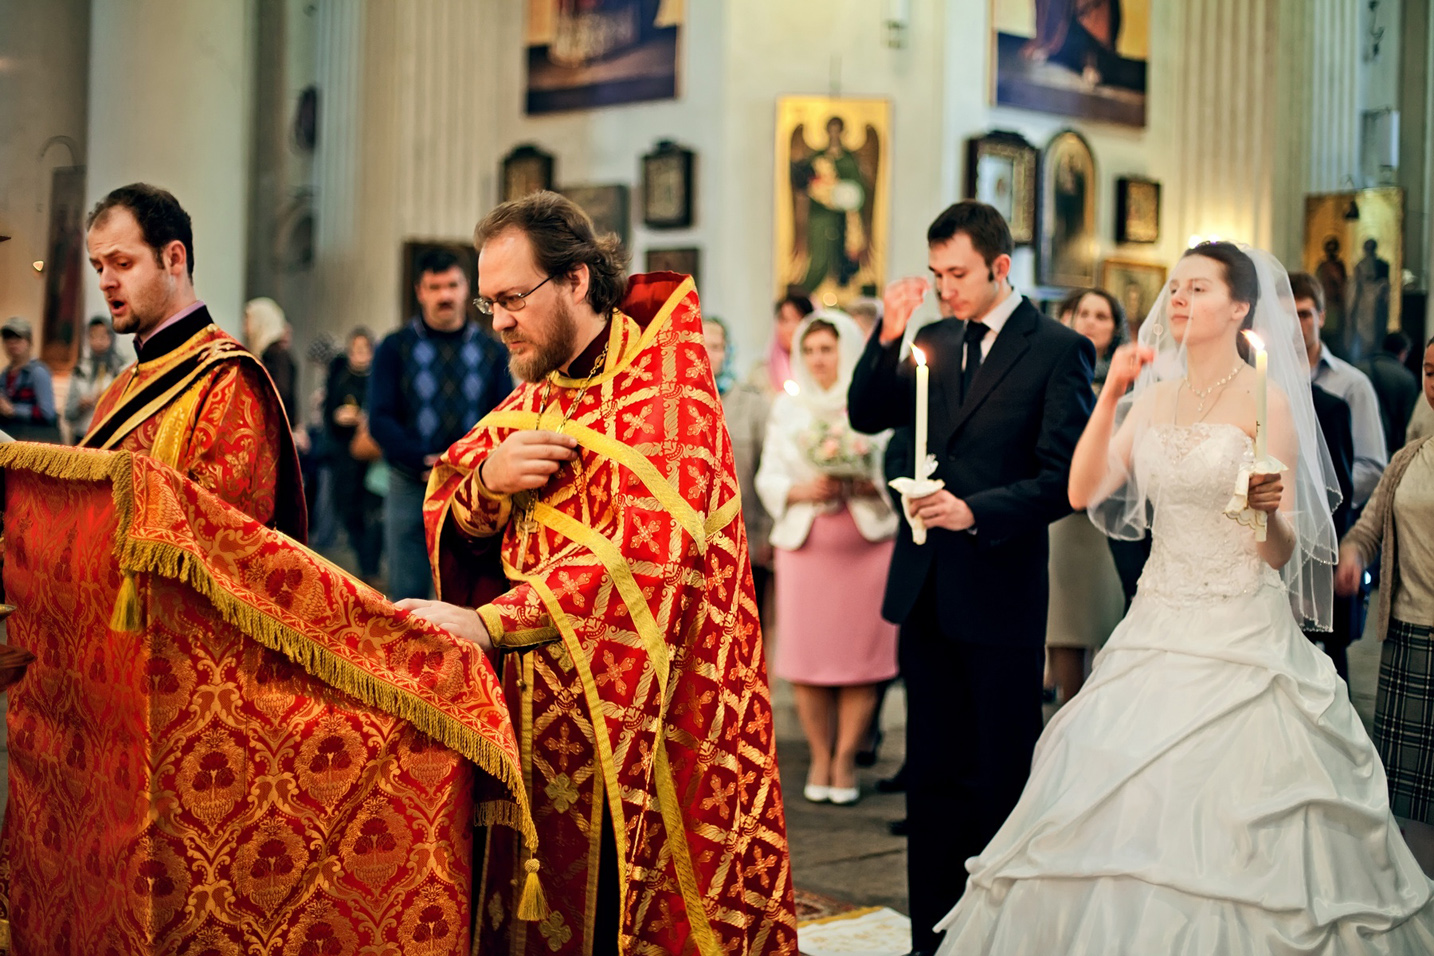 What do orthodox believe about marriage?